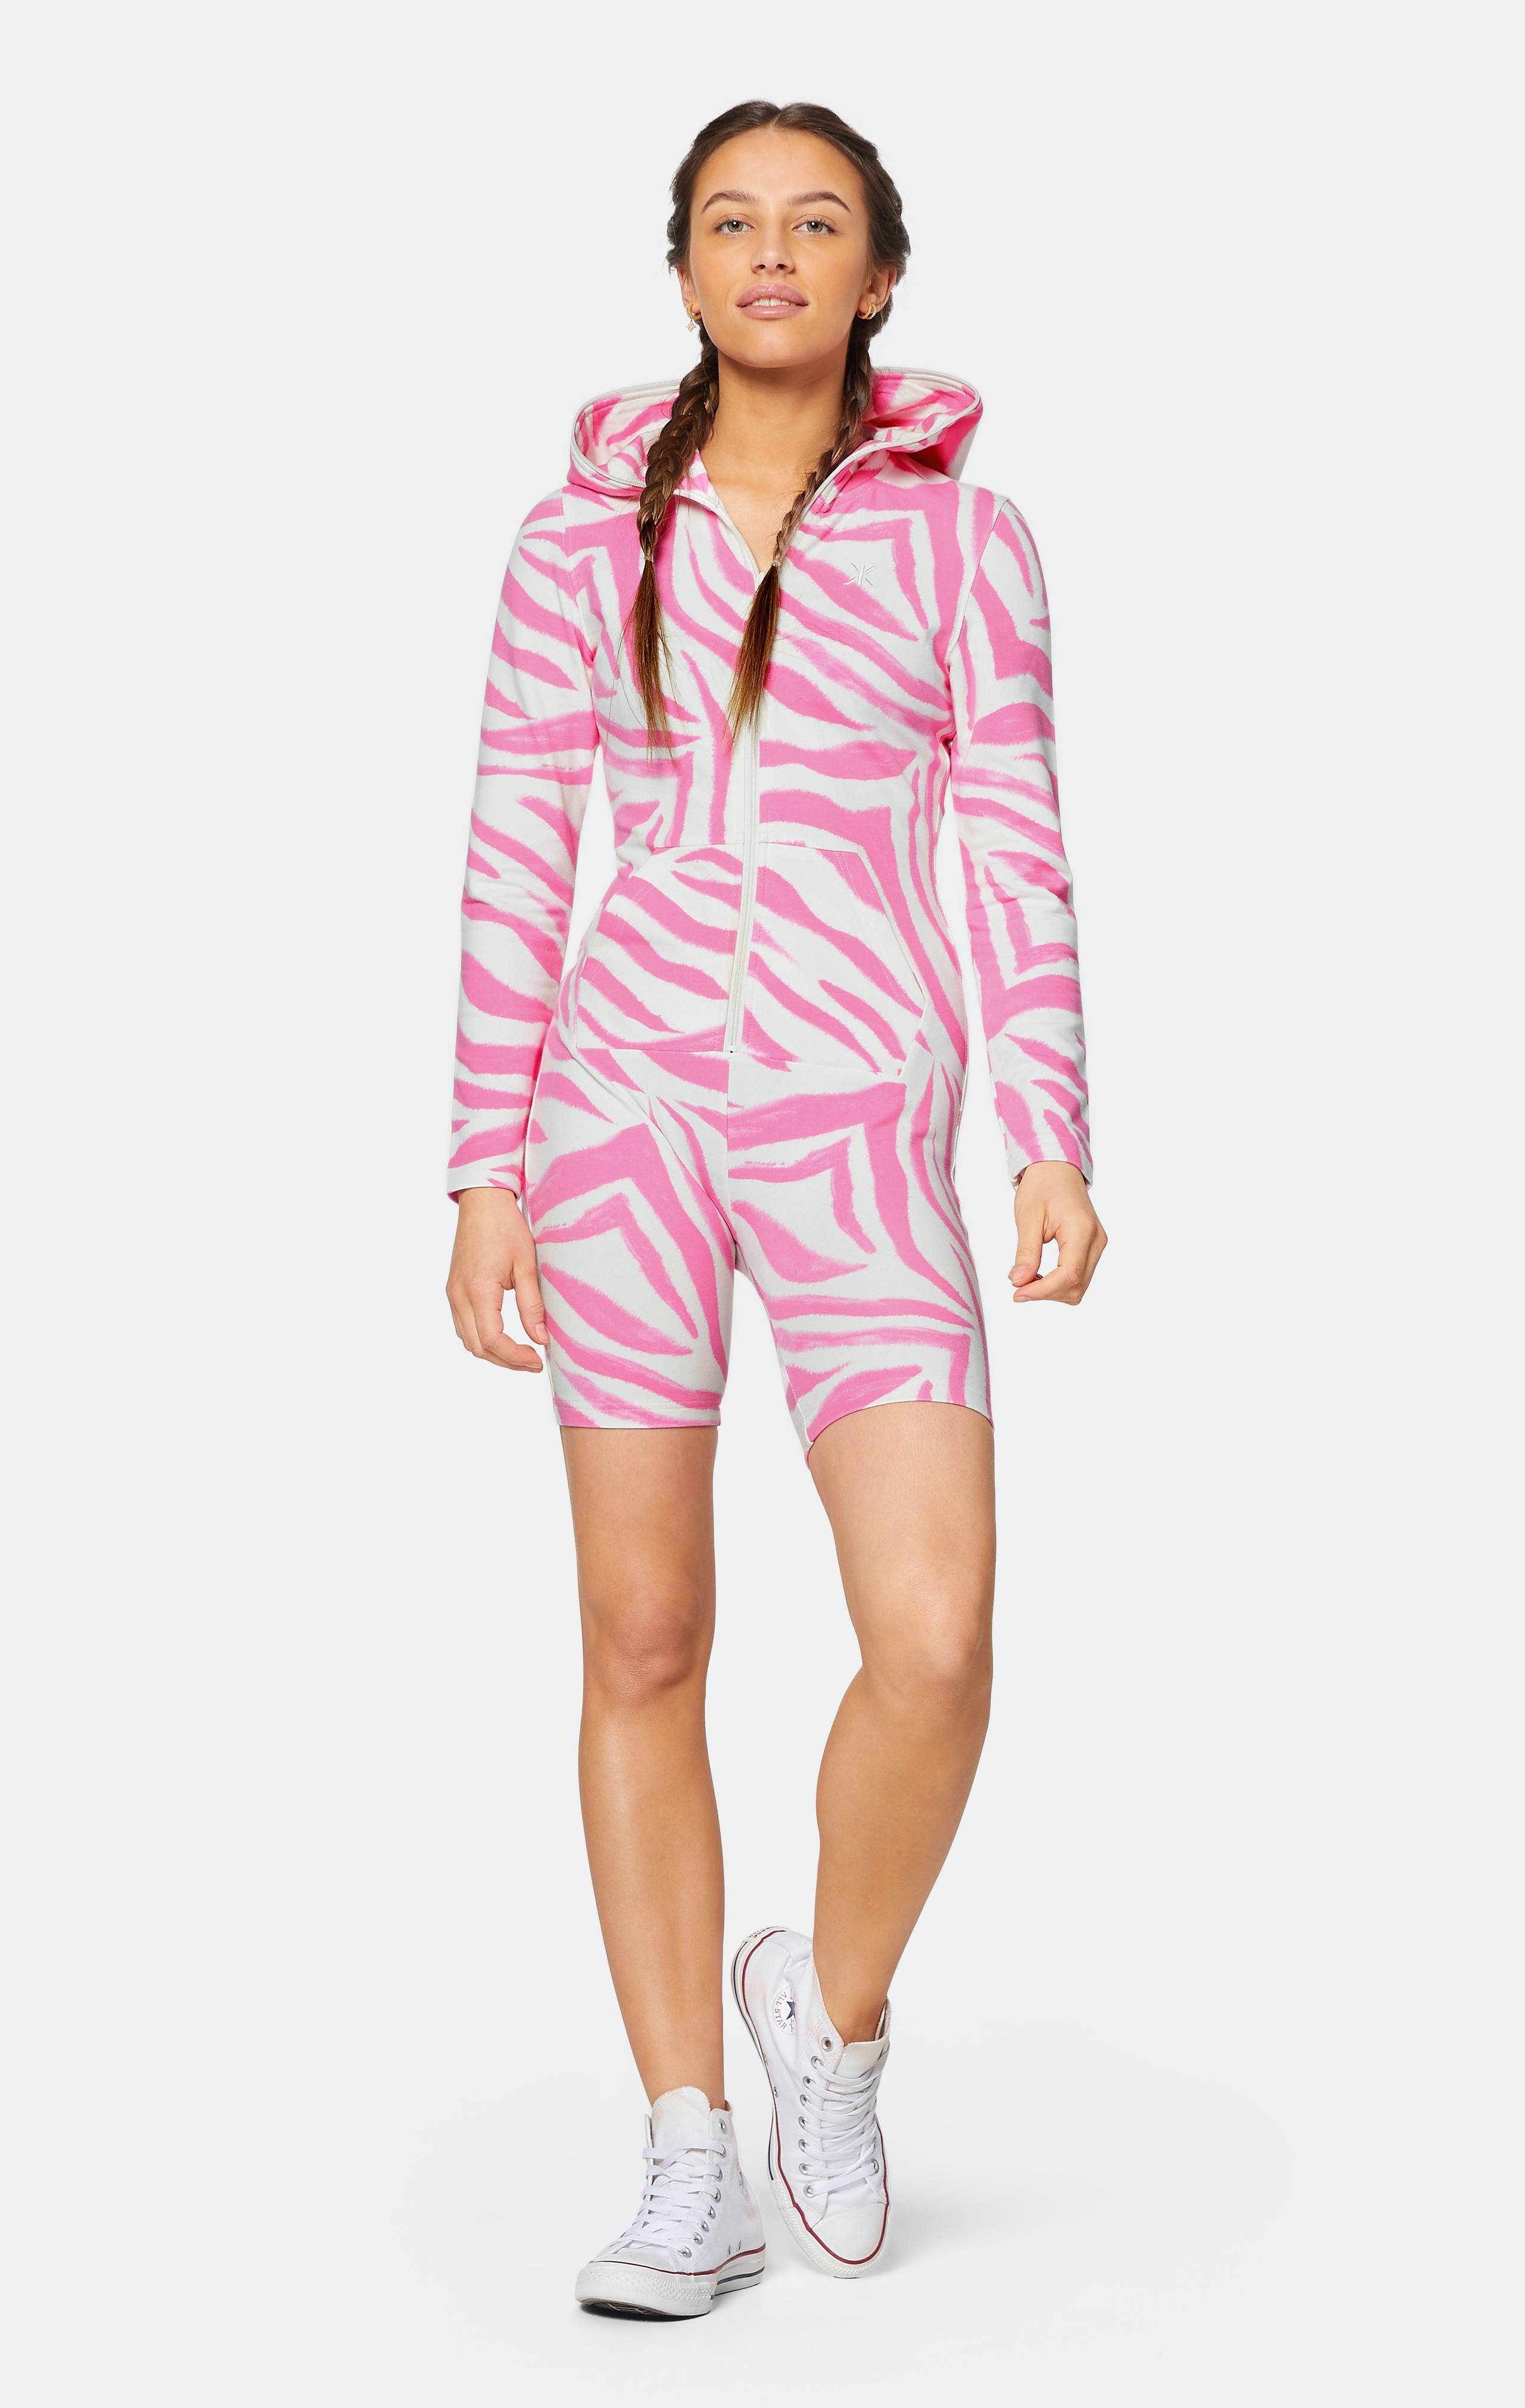 Onepiece Zebra Fitted Short Jumpsuit Pink - 5